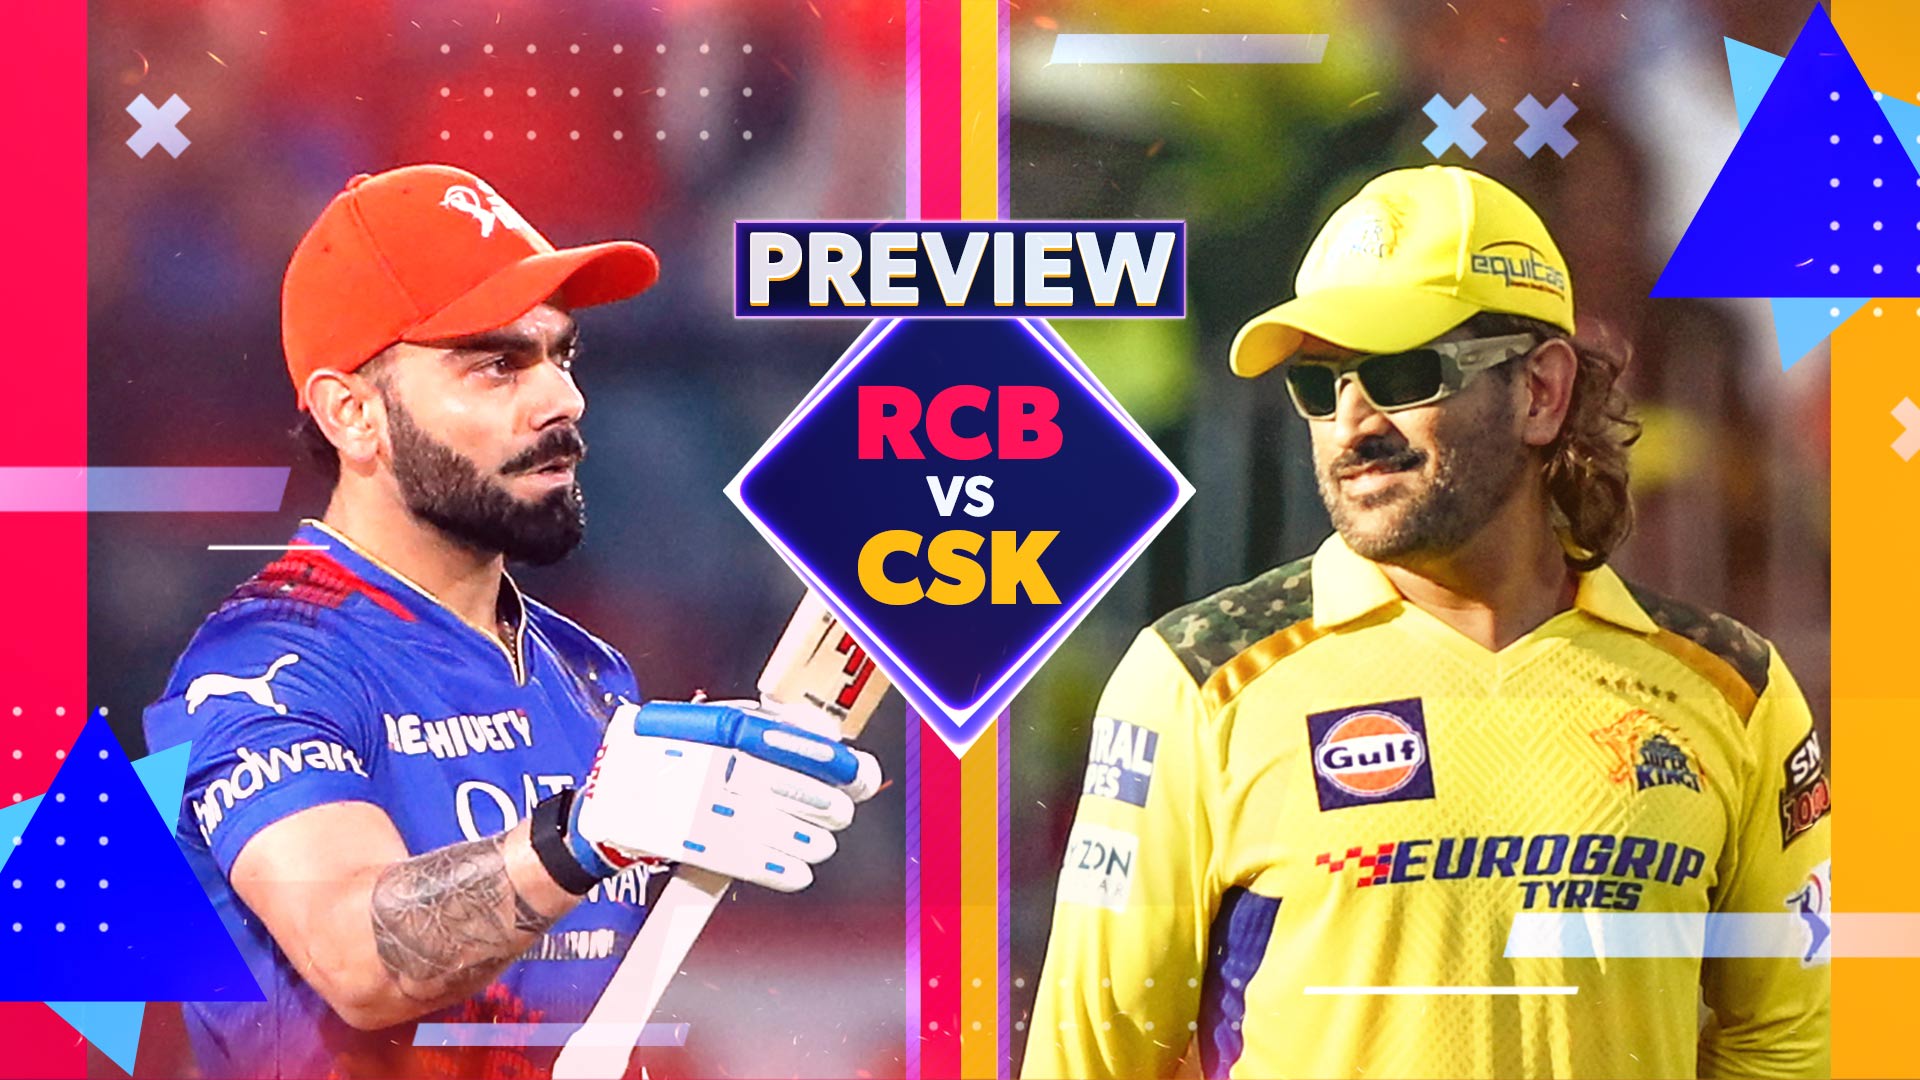 RCB vs CSK: All You Need to Know